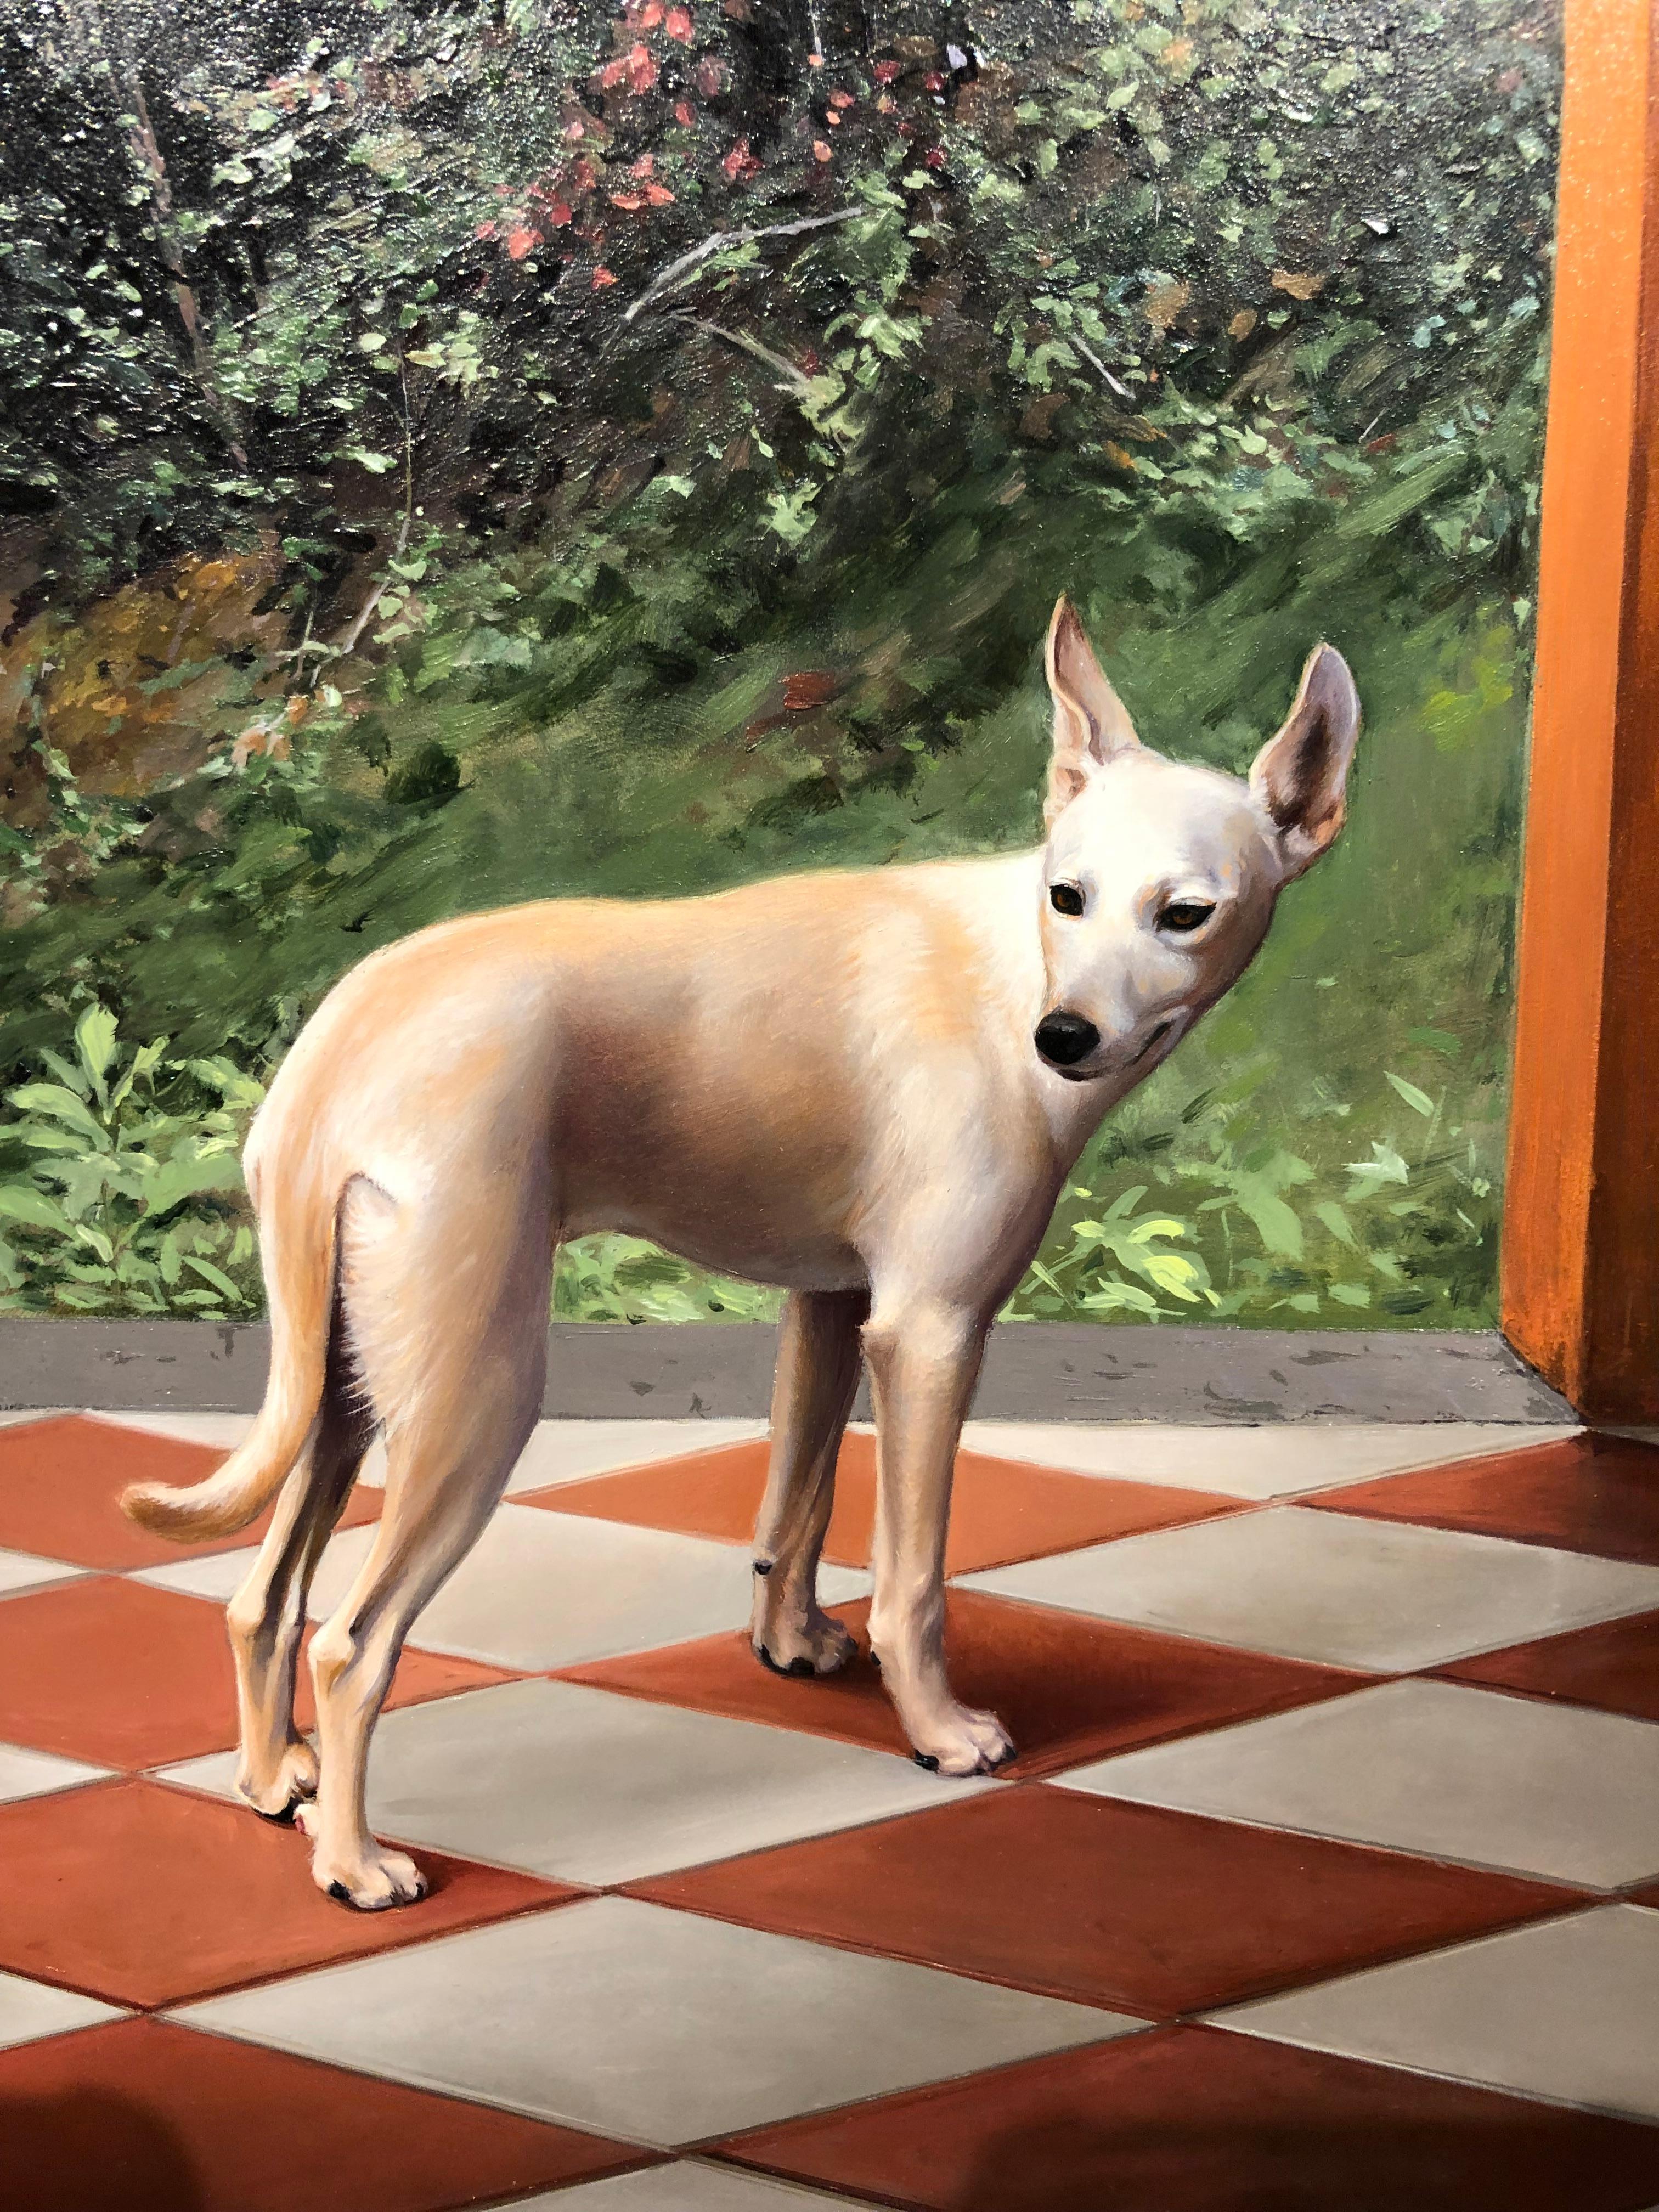 Ibizan Fall - Terra Cotta Colored Architectural Walls w/ Wooded Landscape & Dog - Painting by Carol Pylant